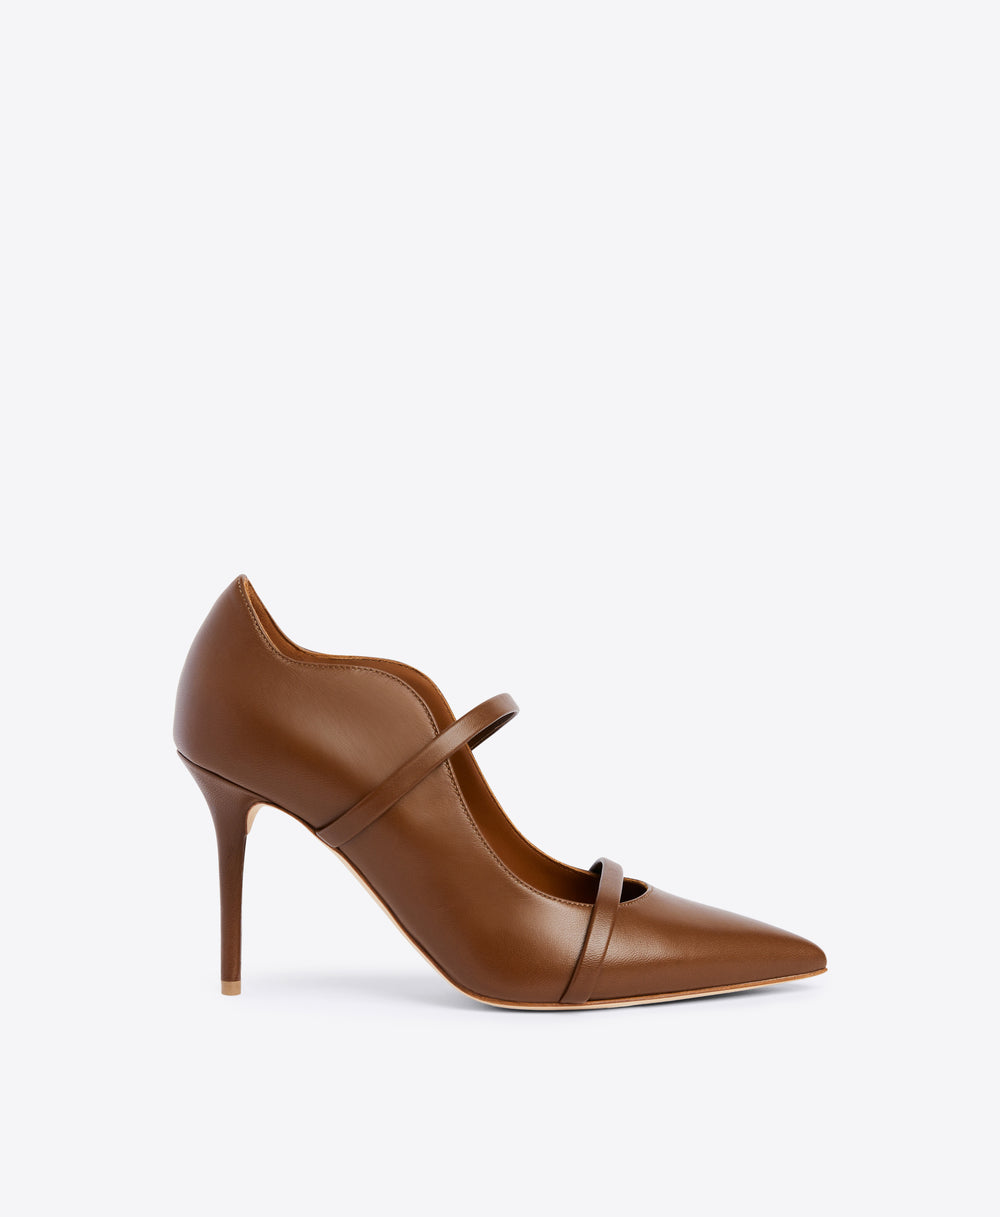 Double Strap Dark Brown Leather Stiletto Pumps - Pointed Toe | Malone Souliers 